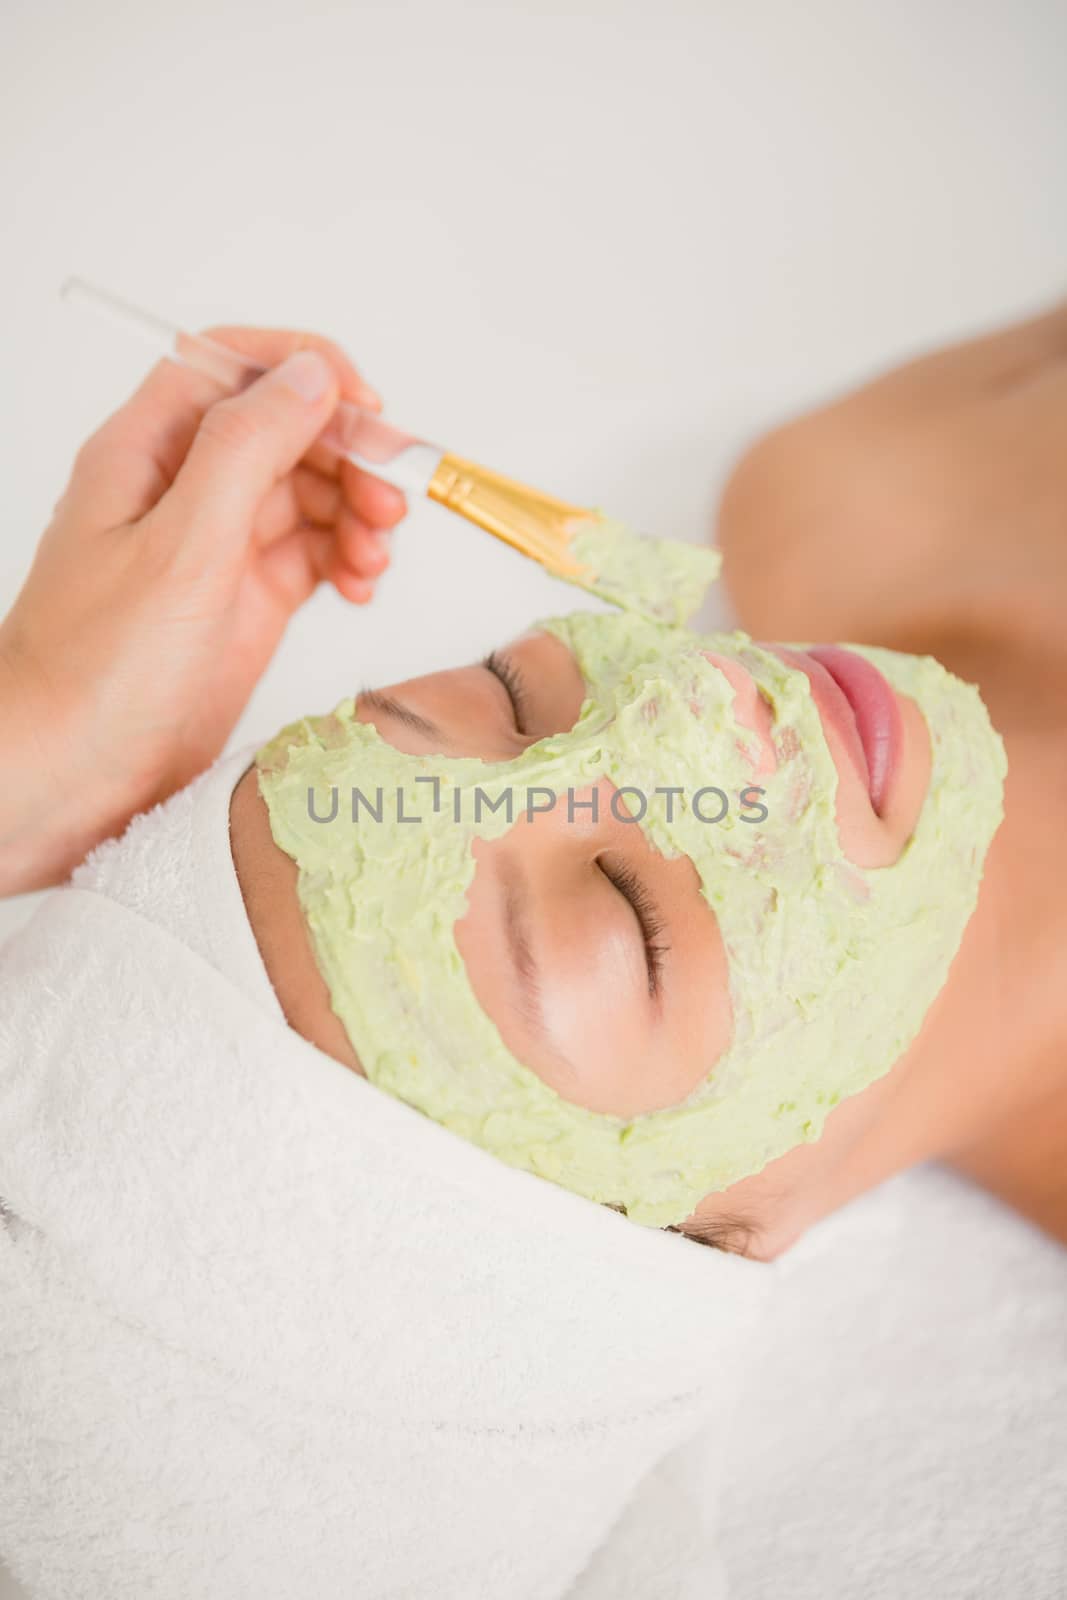 Attractive young woman receiving treatment at spa center by Wavebreakmedia